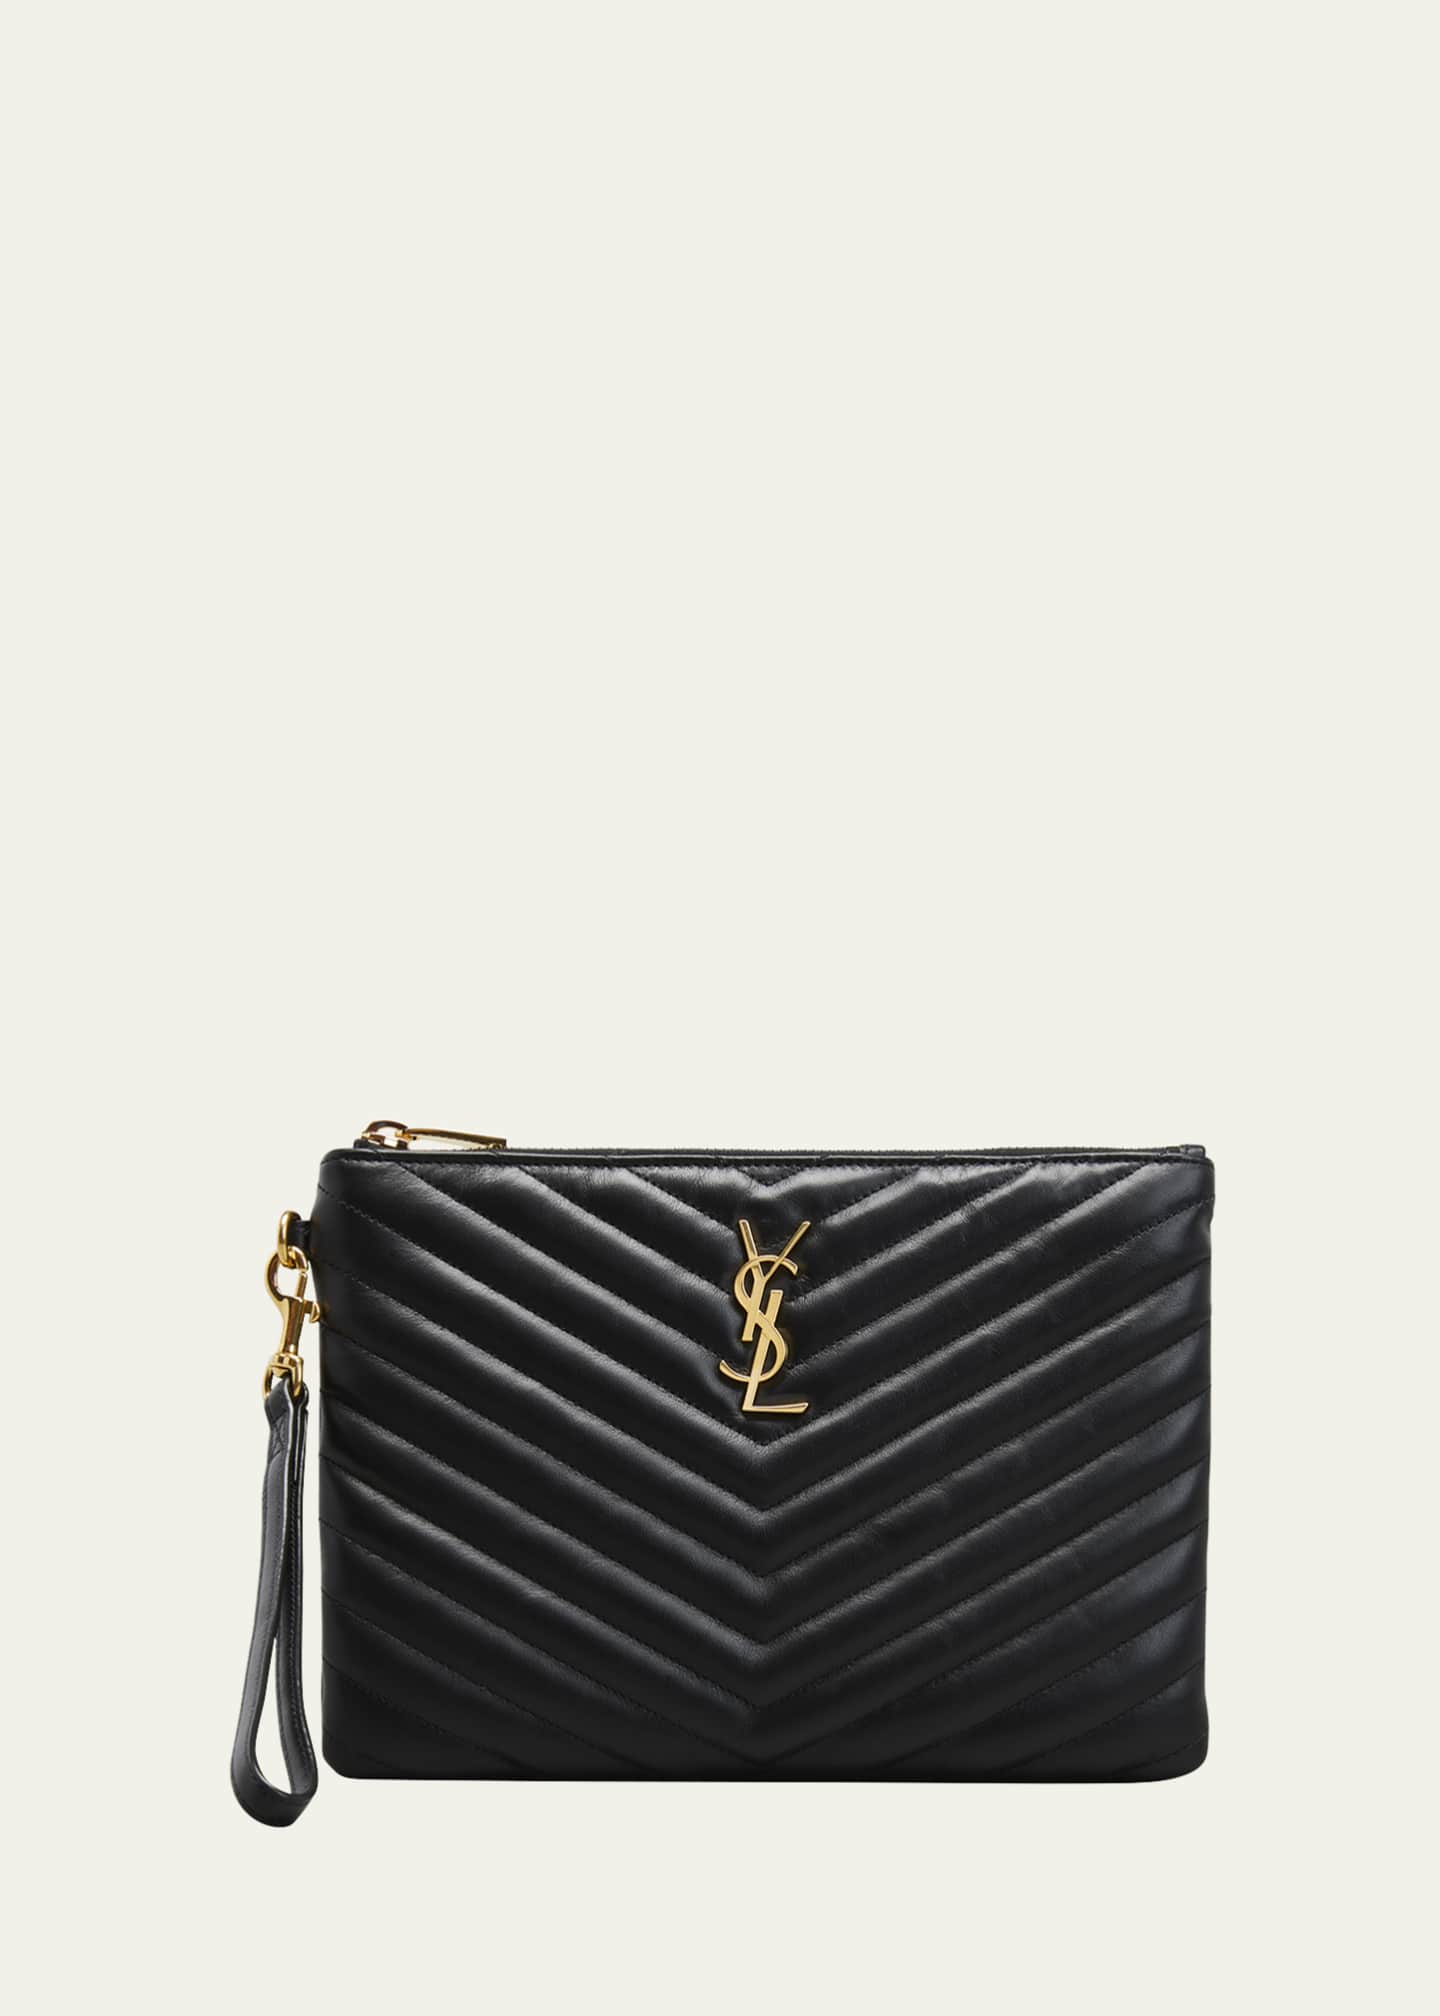 YSL SAINT LAURENT Monogramme quilted leather pouch, Women's